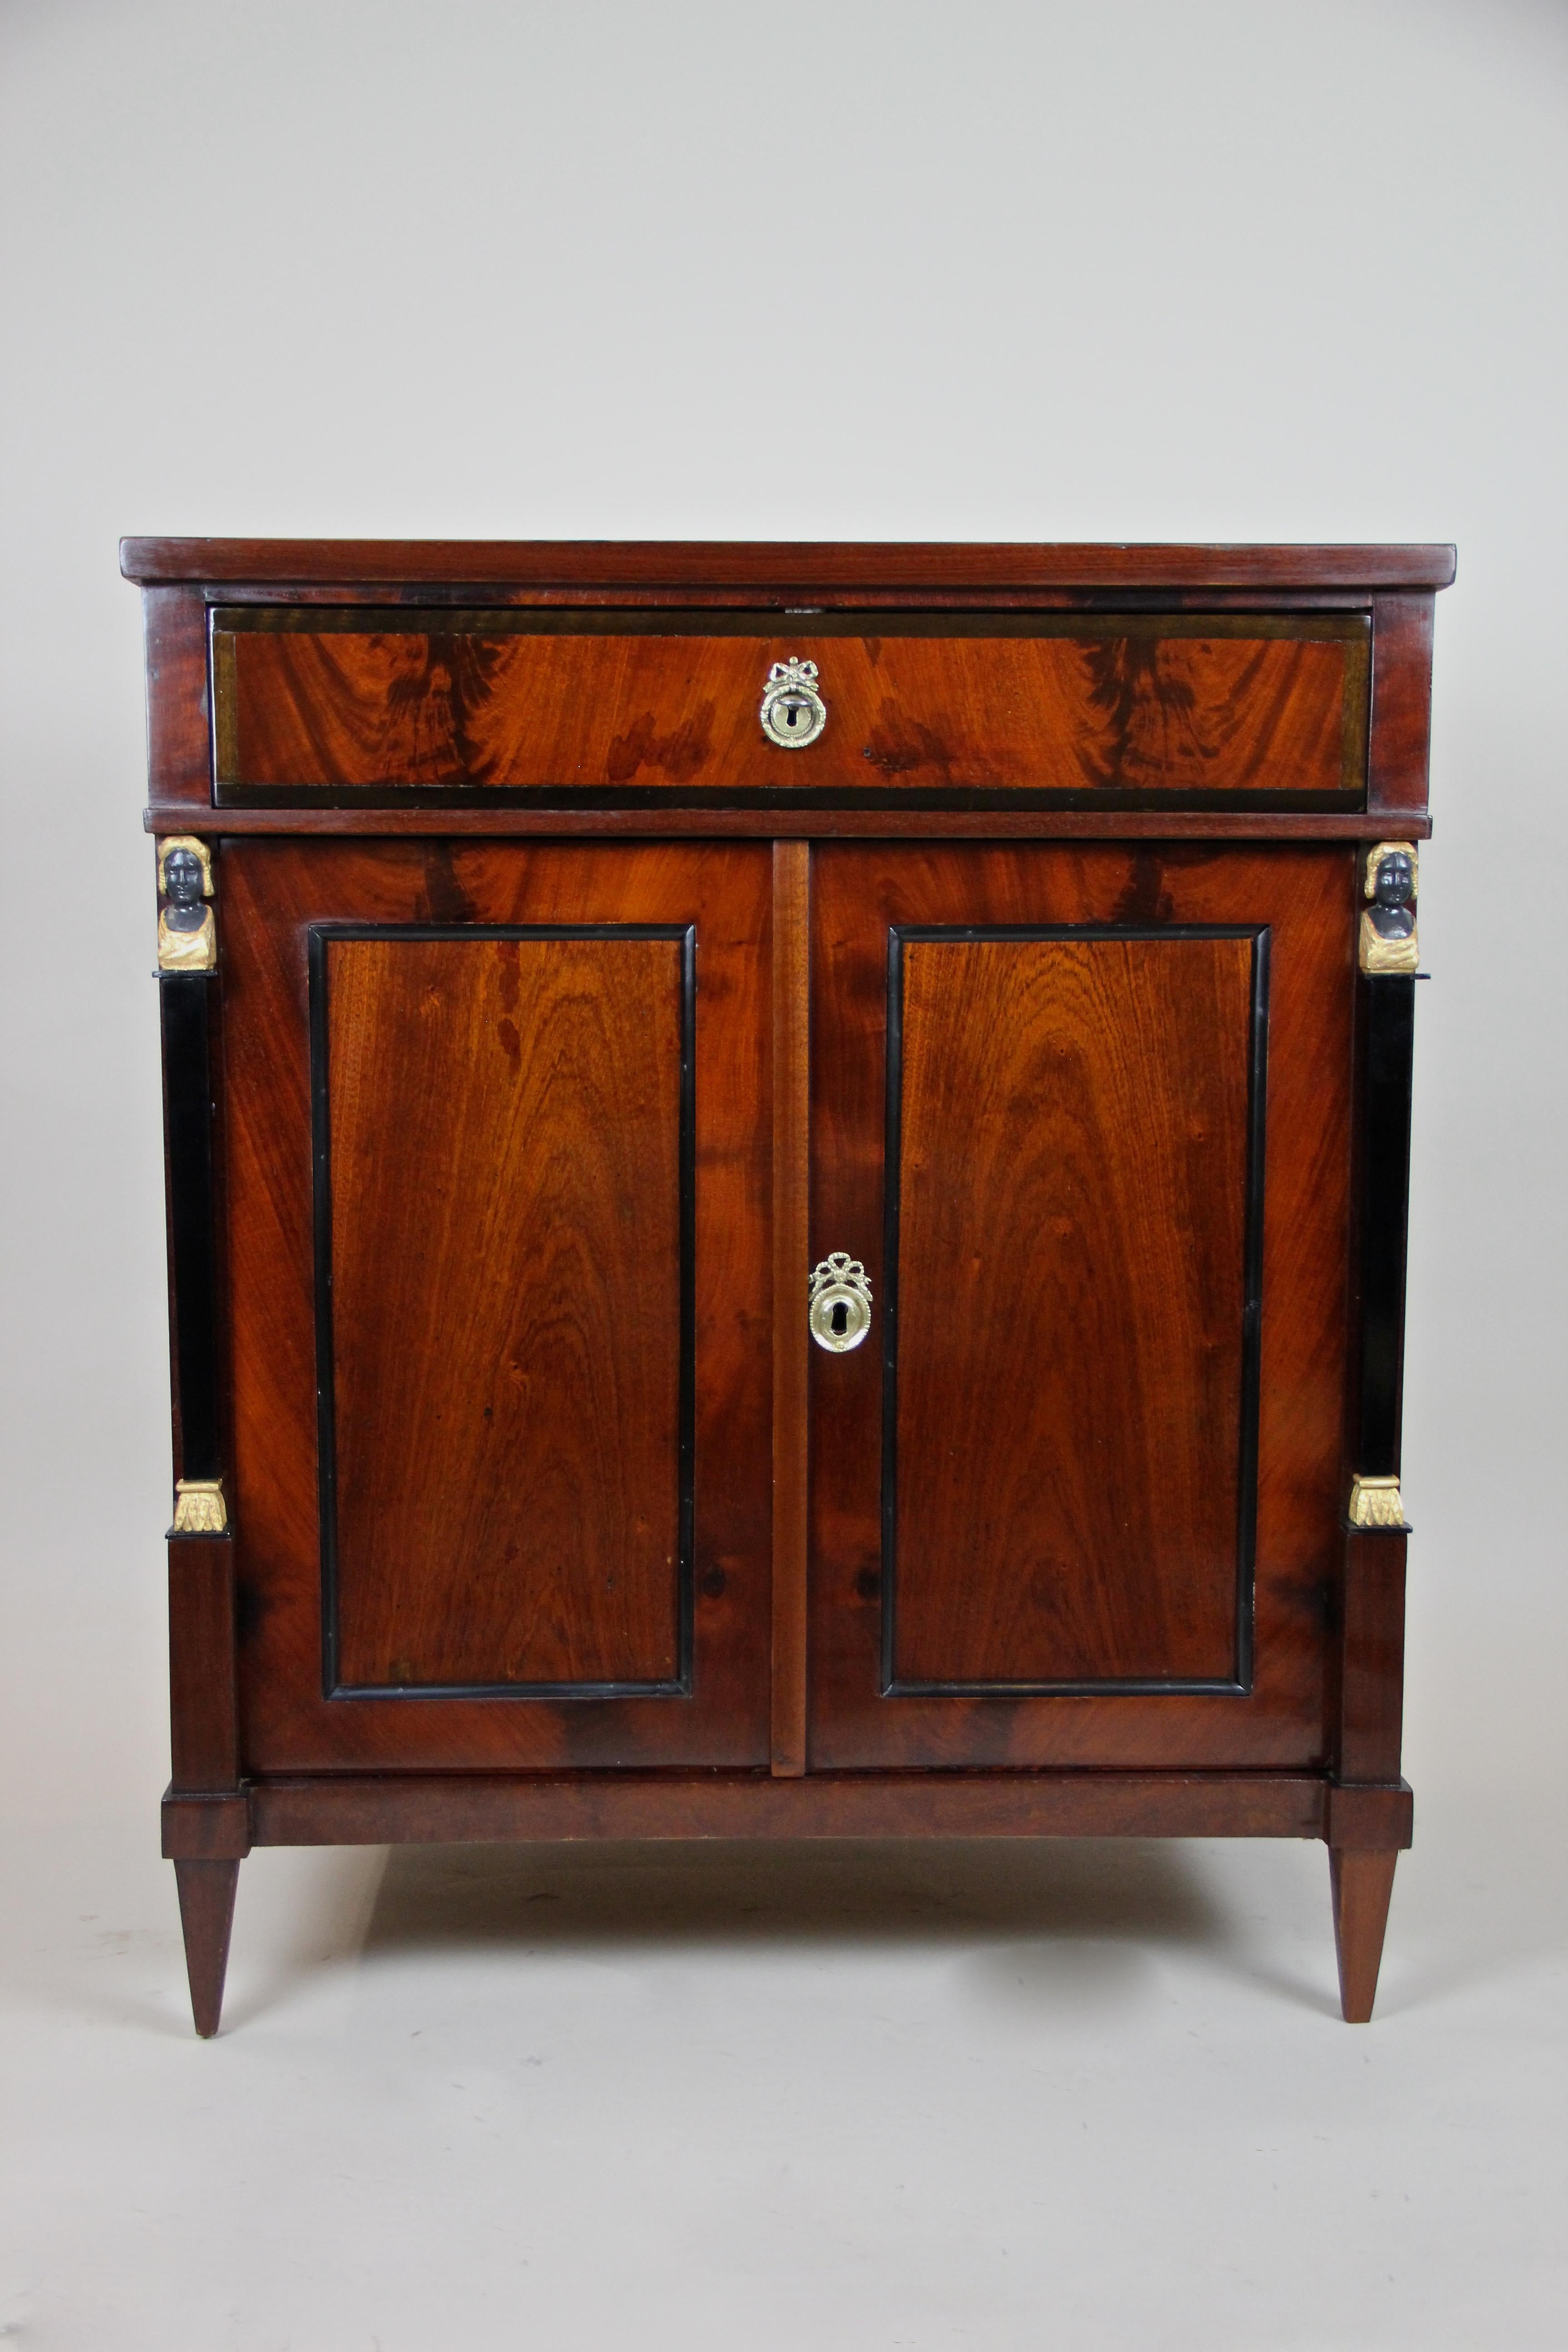 Striking mahogany commode from the Empire period in Germany, circa 1815-1820. The straight, timeless shape combined with unique mirror matched mahogany veneer makes this early 19th century trumeau commode an absolute dreamlike piece. The great sized